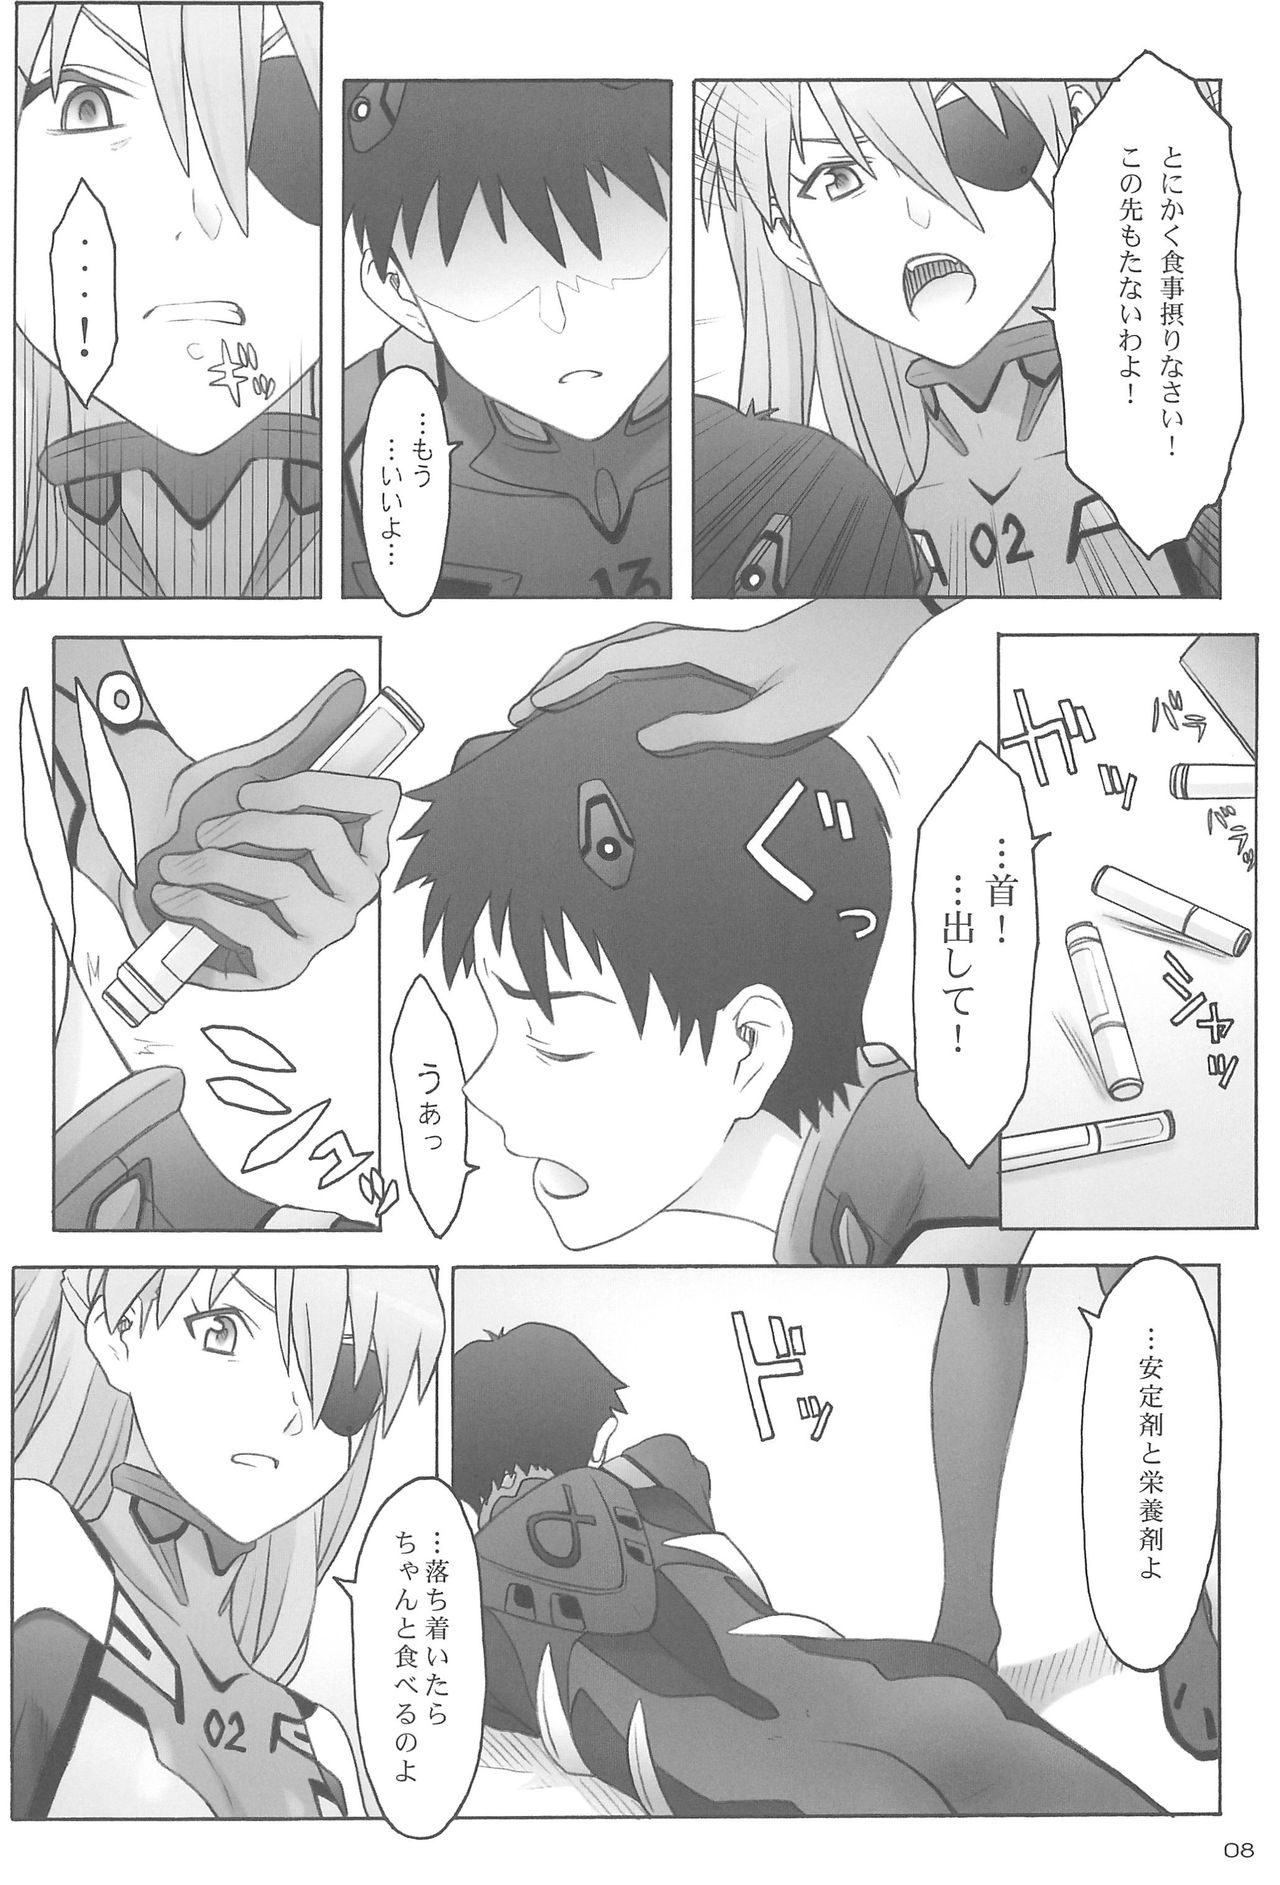 (C85) [The Knight of the Pants (Tsuji Takeshi)] Quid pro quo (Neon Genesis Evangelion) page 8 full